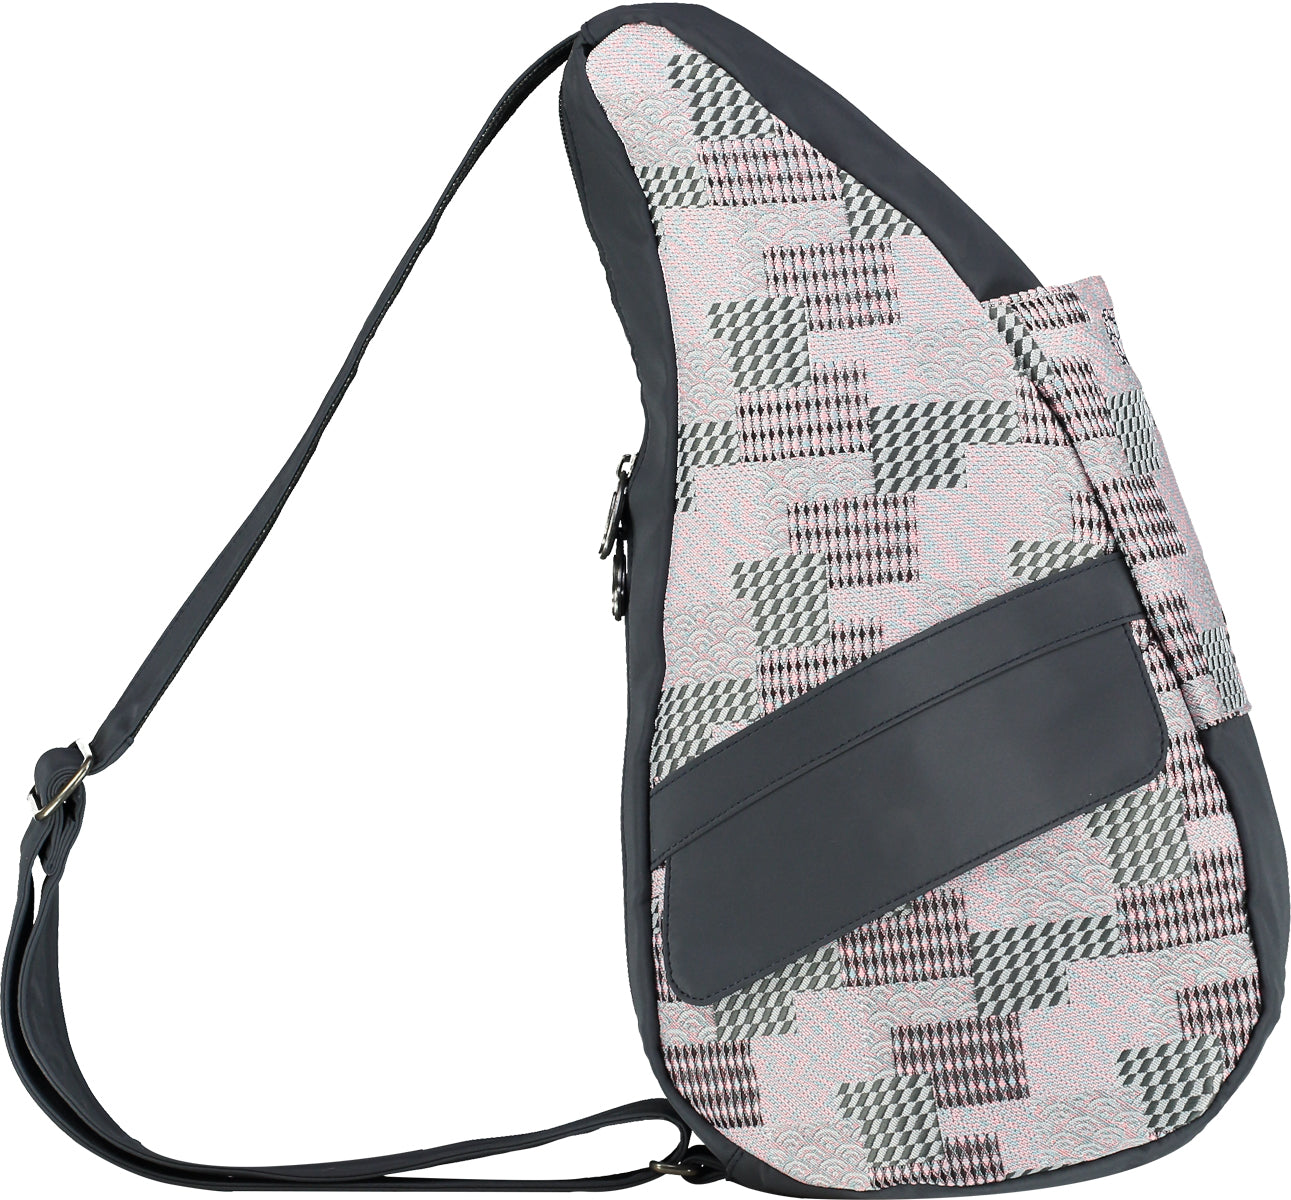 AmeriBag Small Healthy Back Bag Tote Prints and Patterns (Slate Pastel Patchwork)